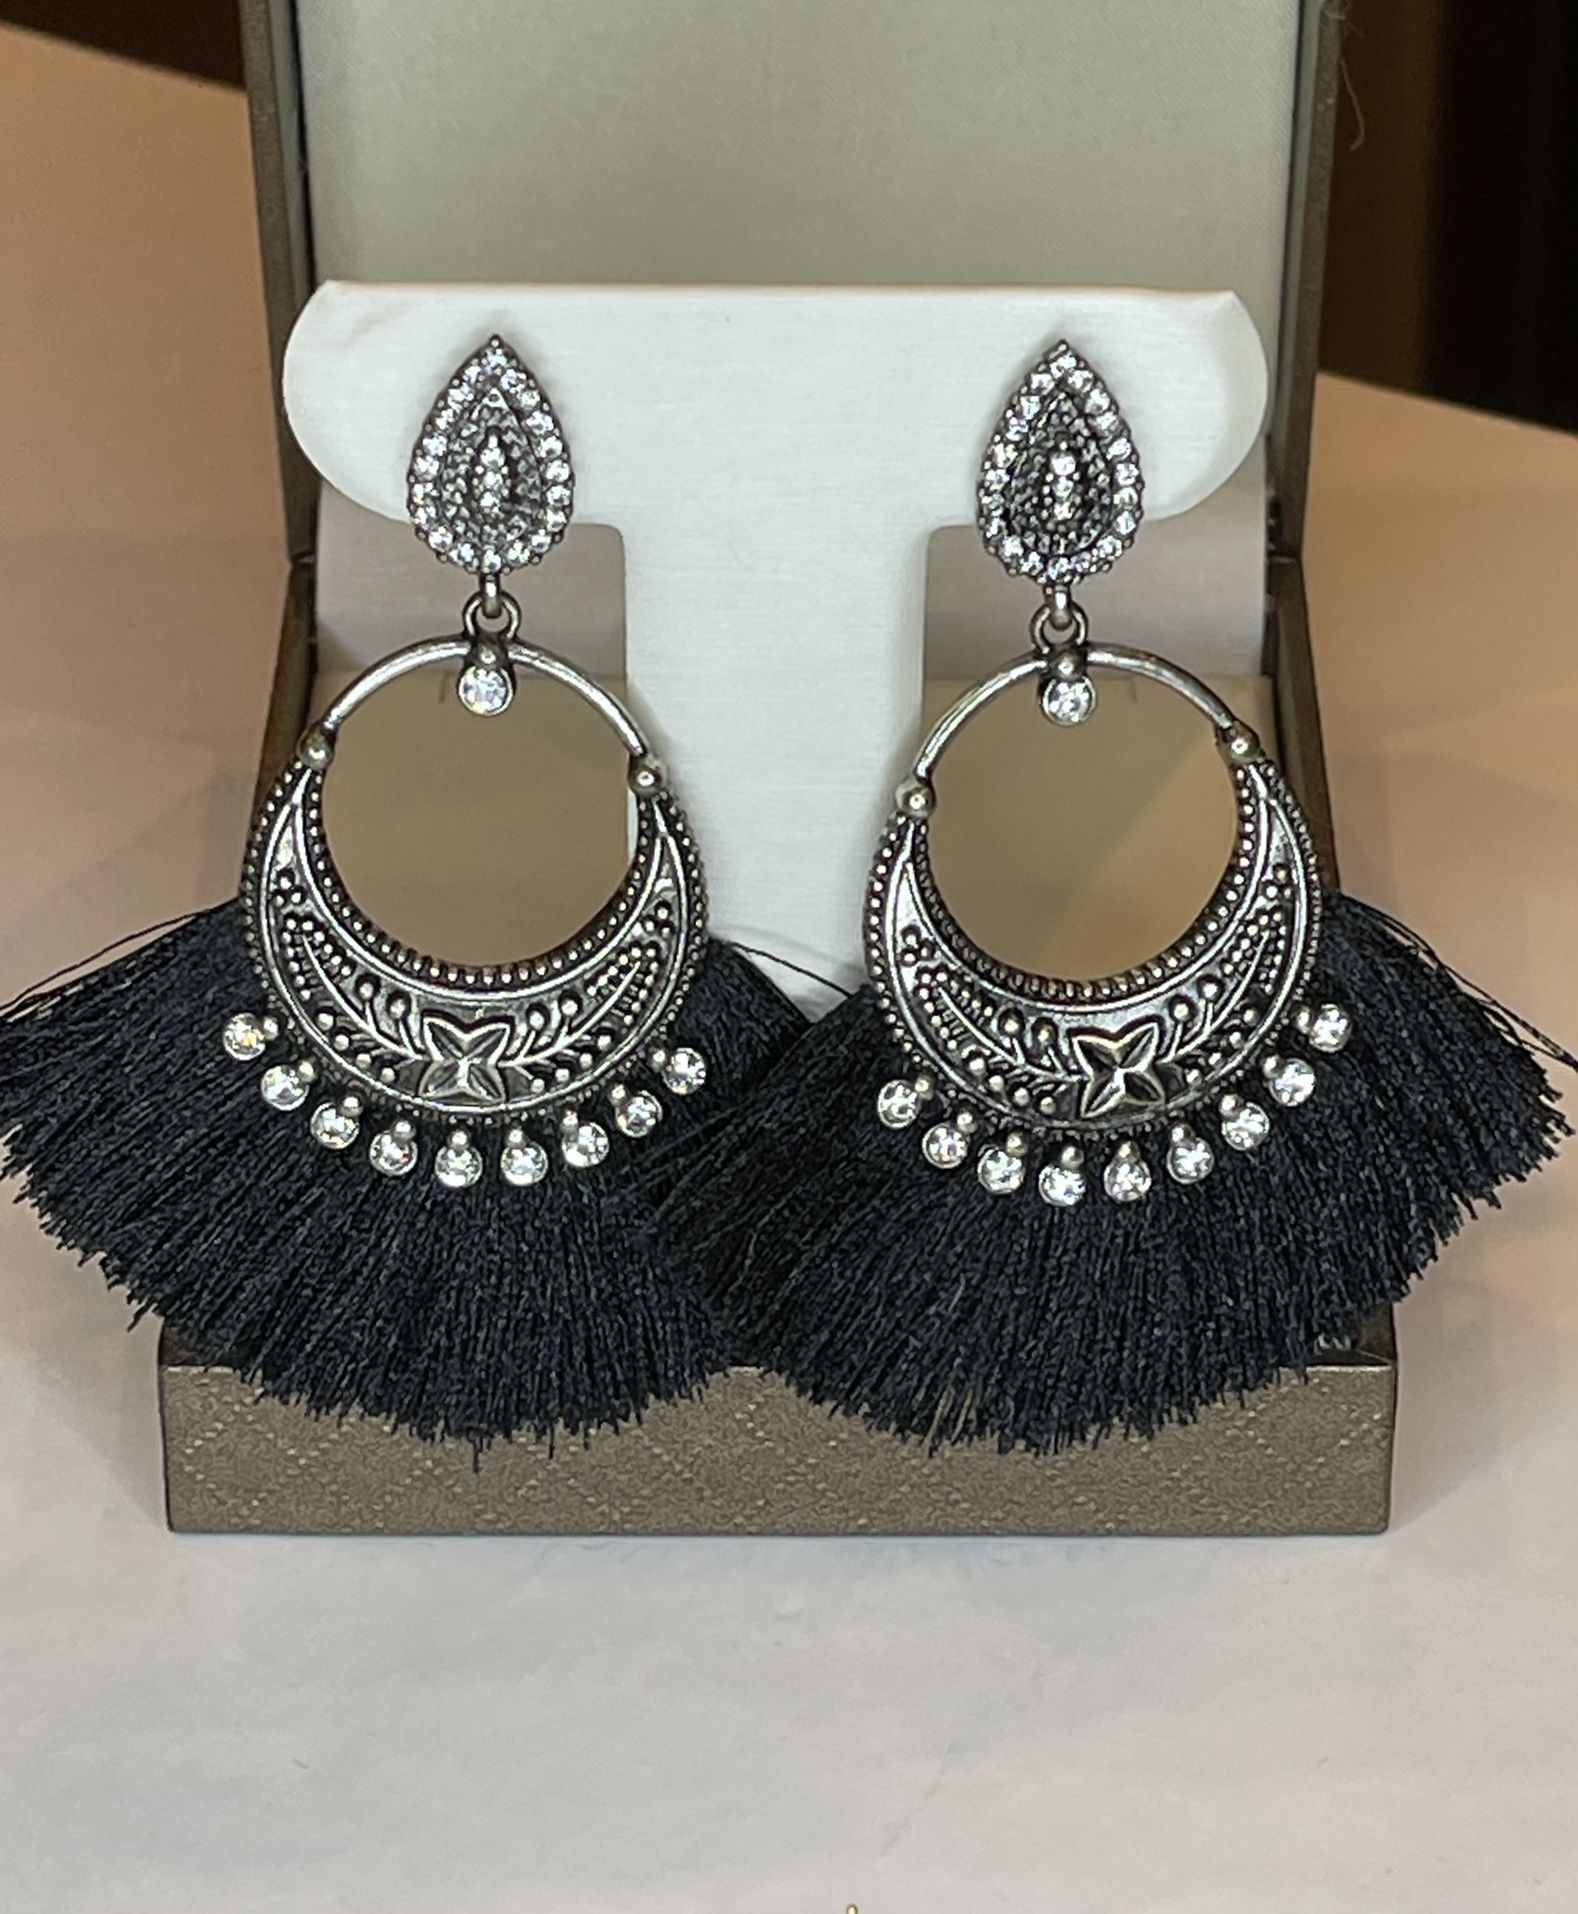 Boutique Black Fringe Earrings With Crystal Detail